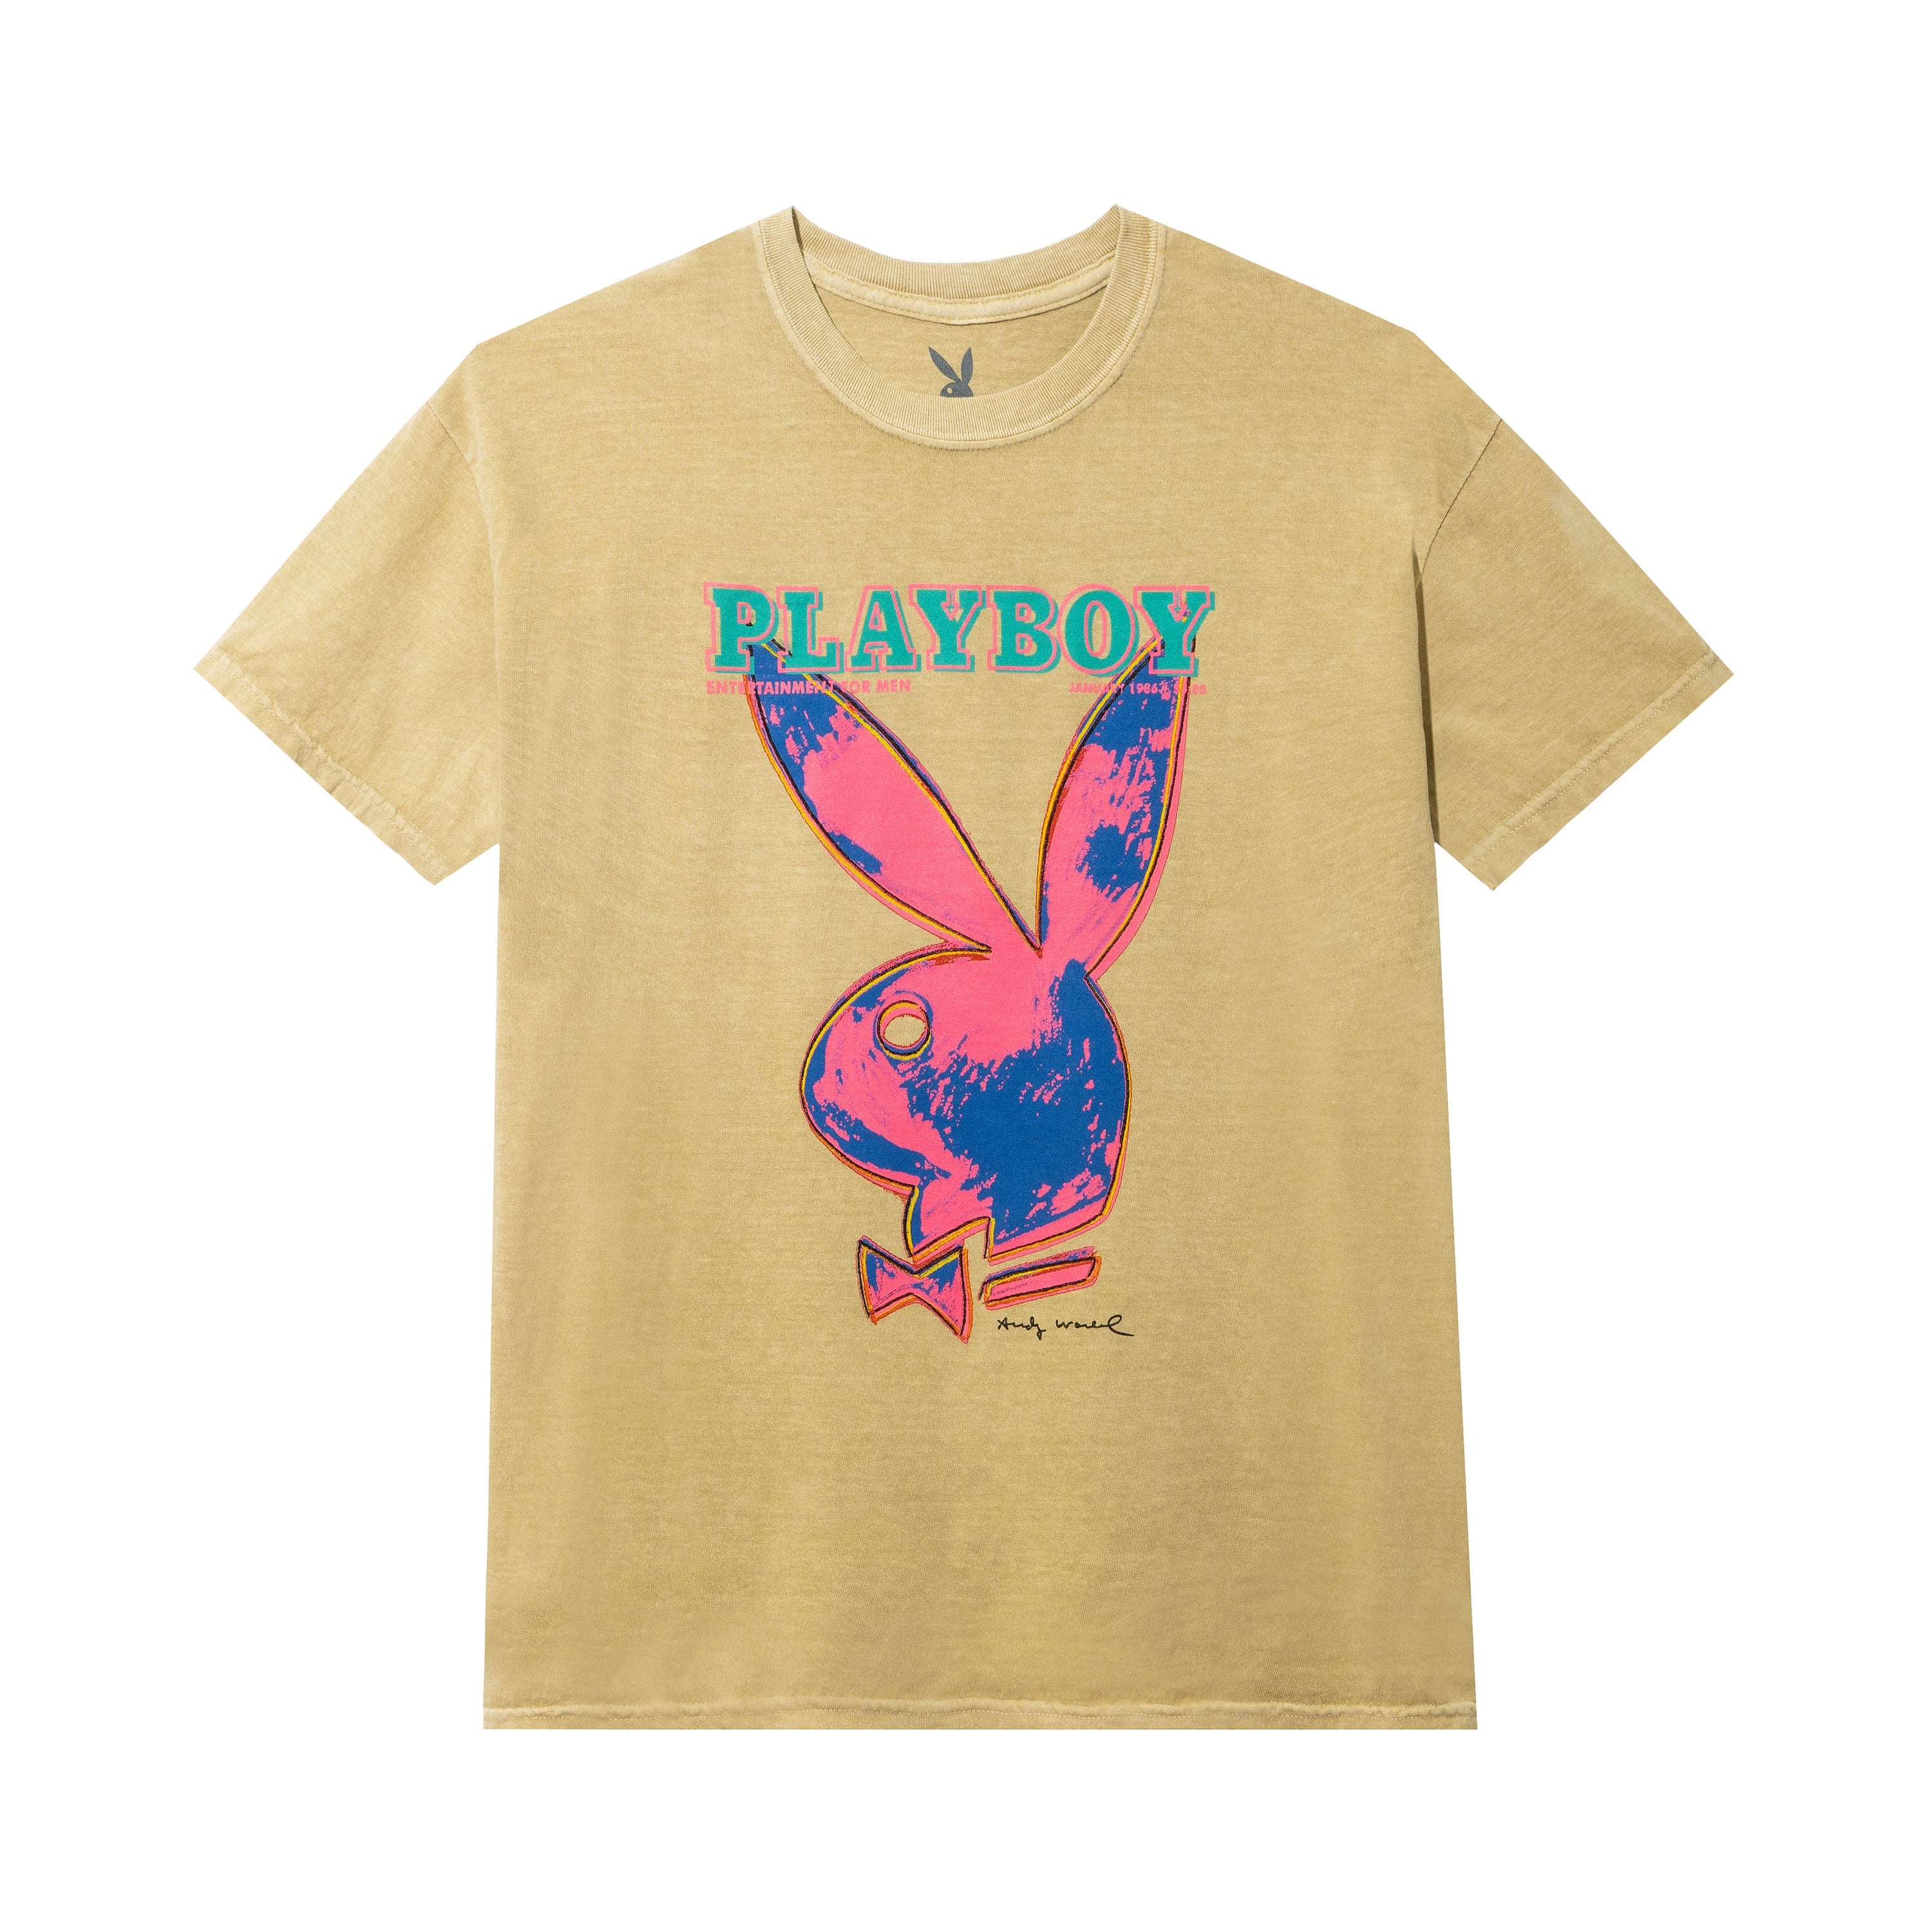 January 1986 PLAYBOY Andy Warhol Cover T-Shirt